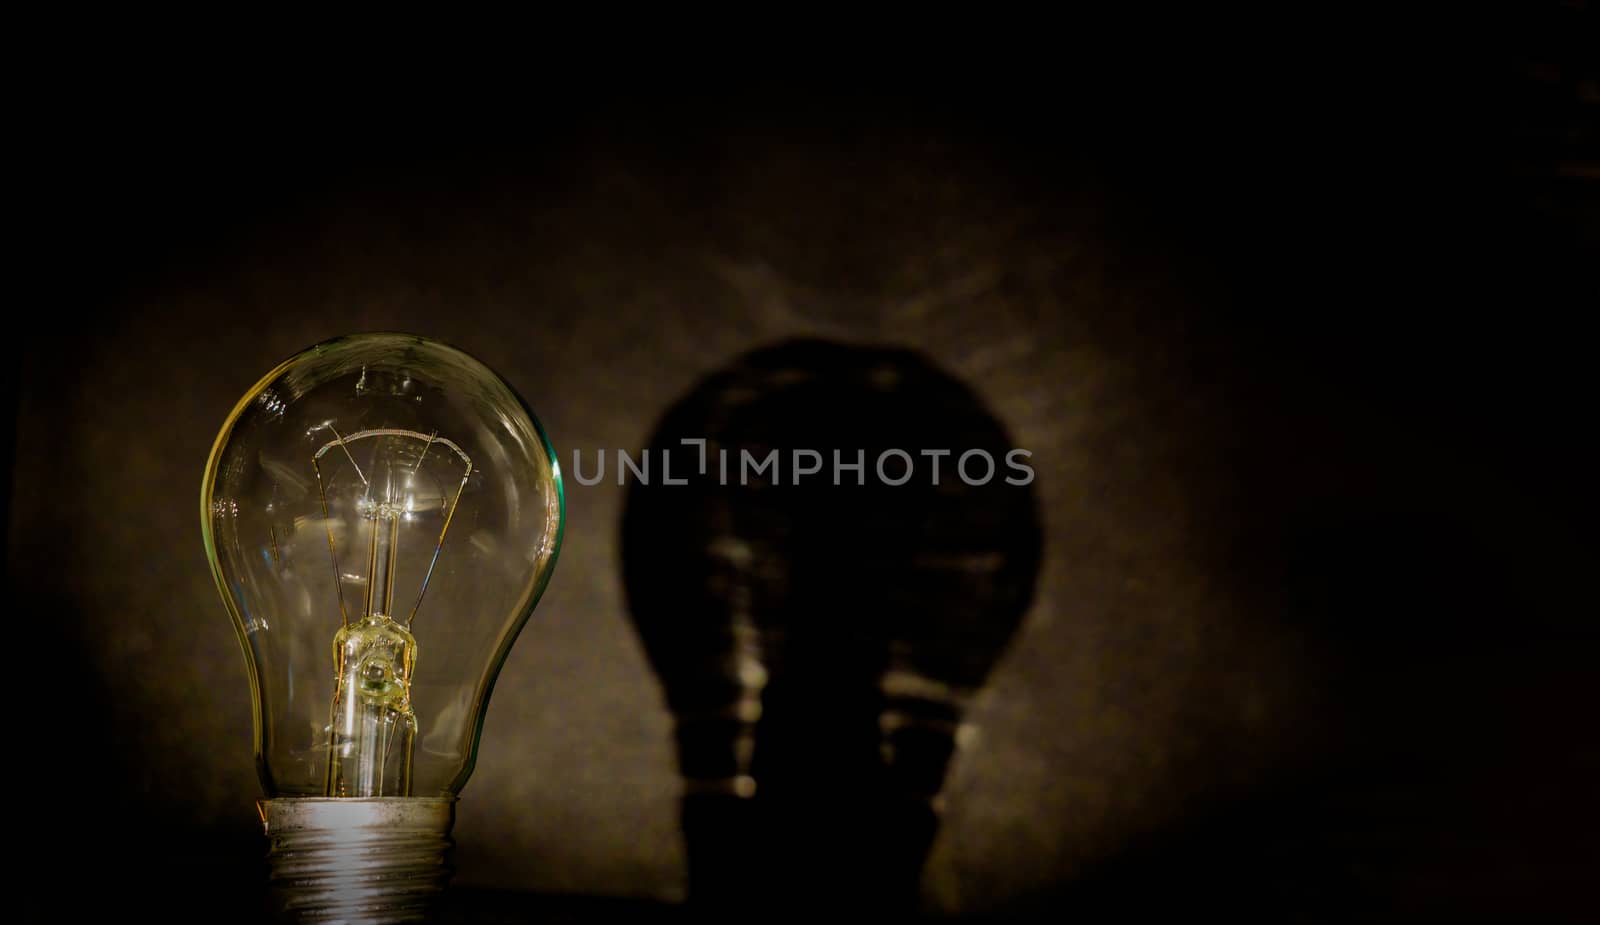 Light bulb, business idea concept. A light bulb on a black background to place text or illustration. The light bulb is a symbol of ideas, innovations, and new thoughts. 220 volt